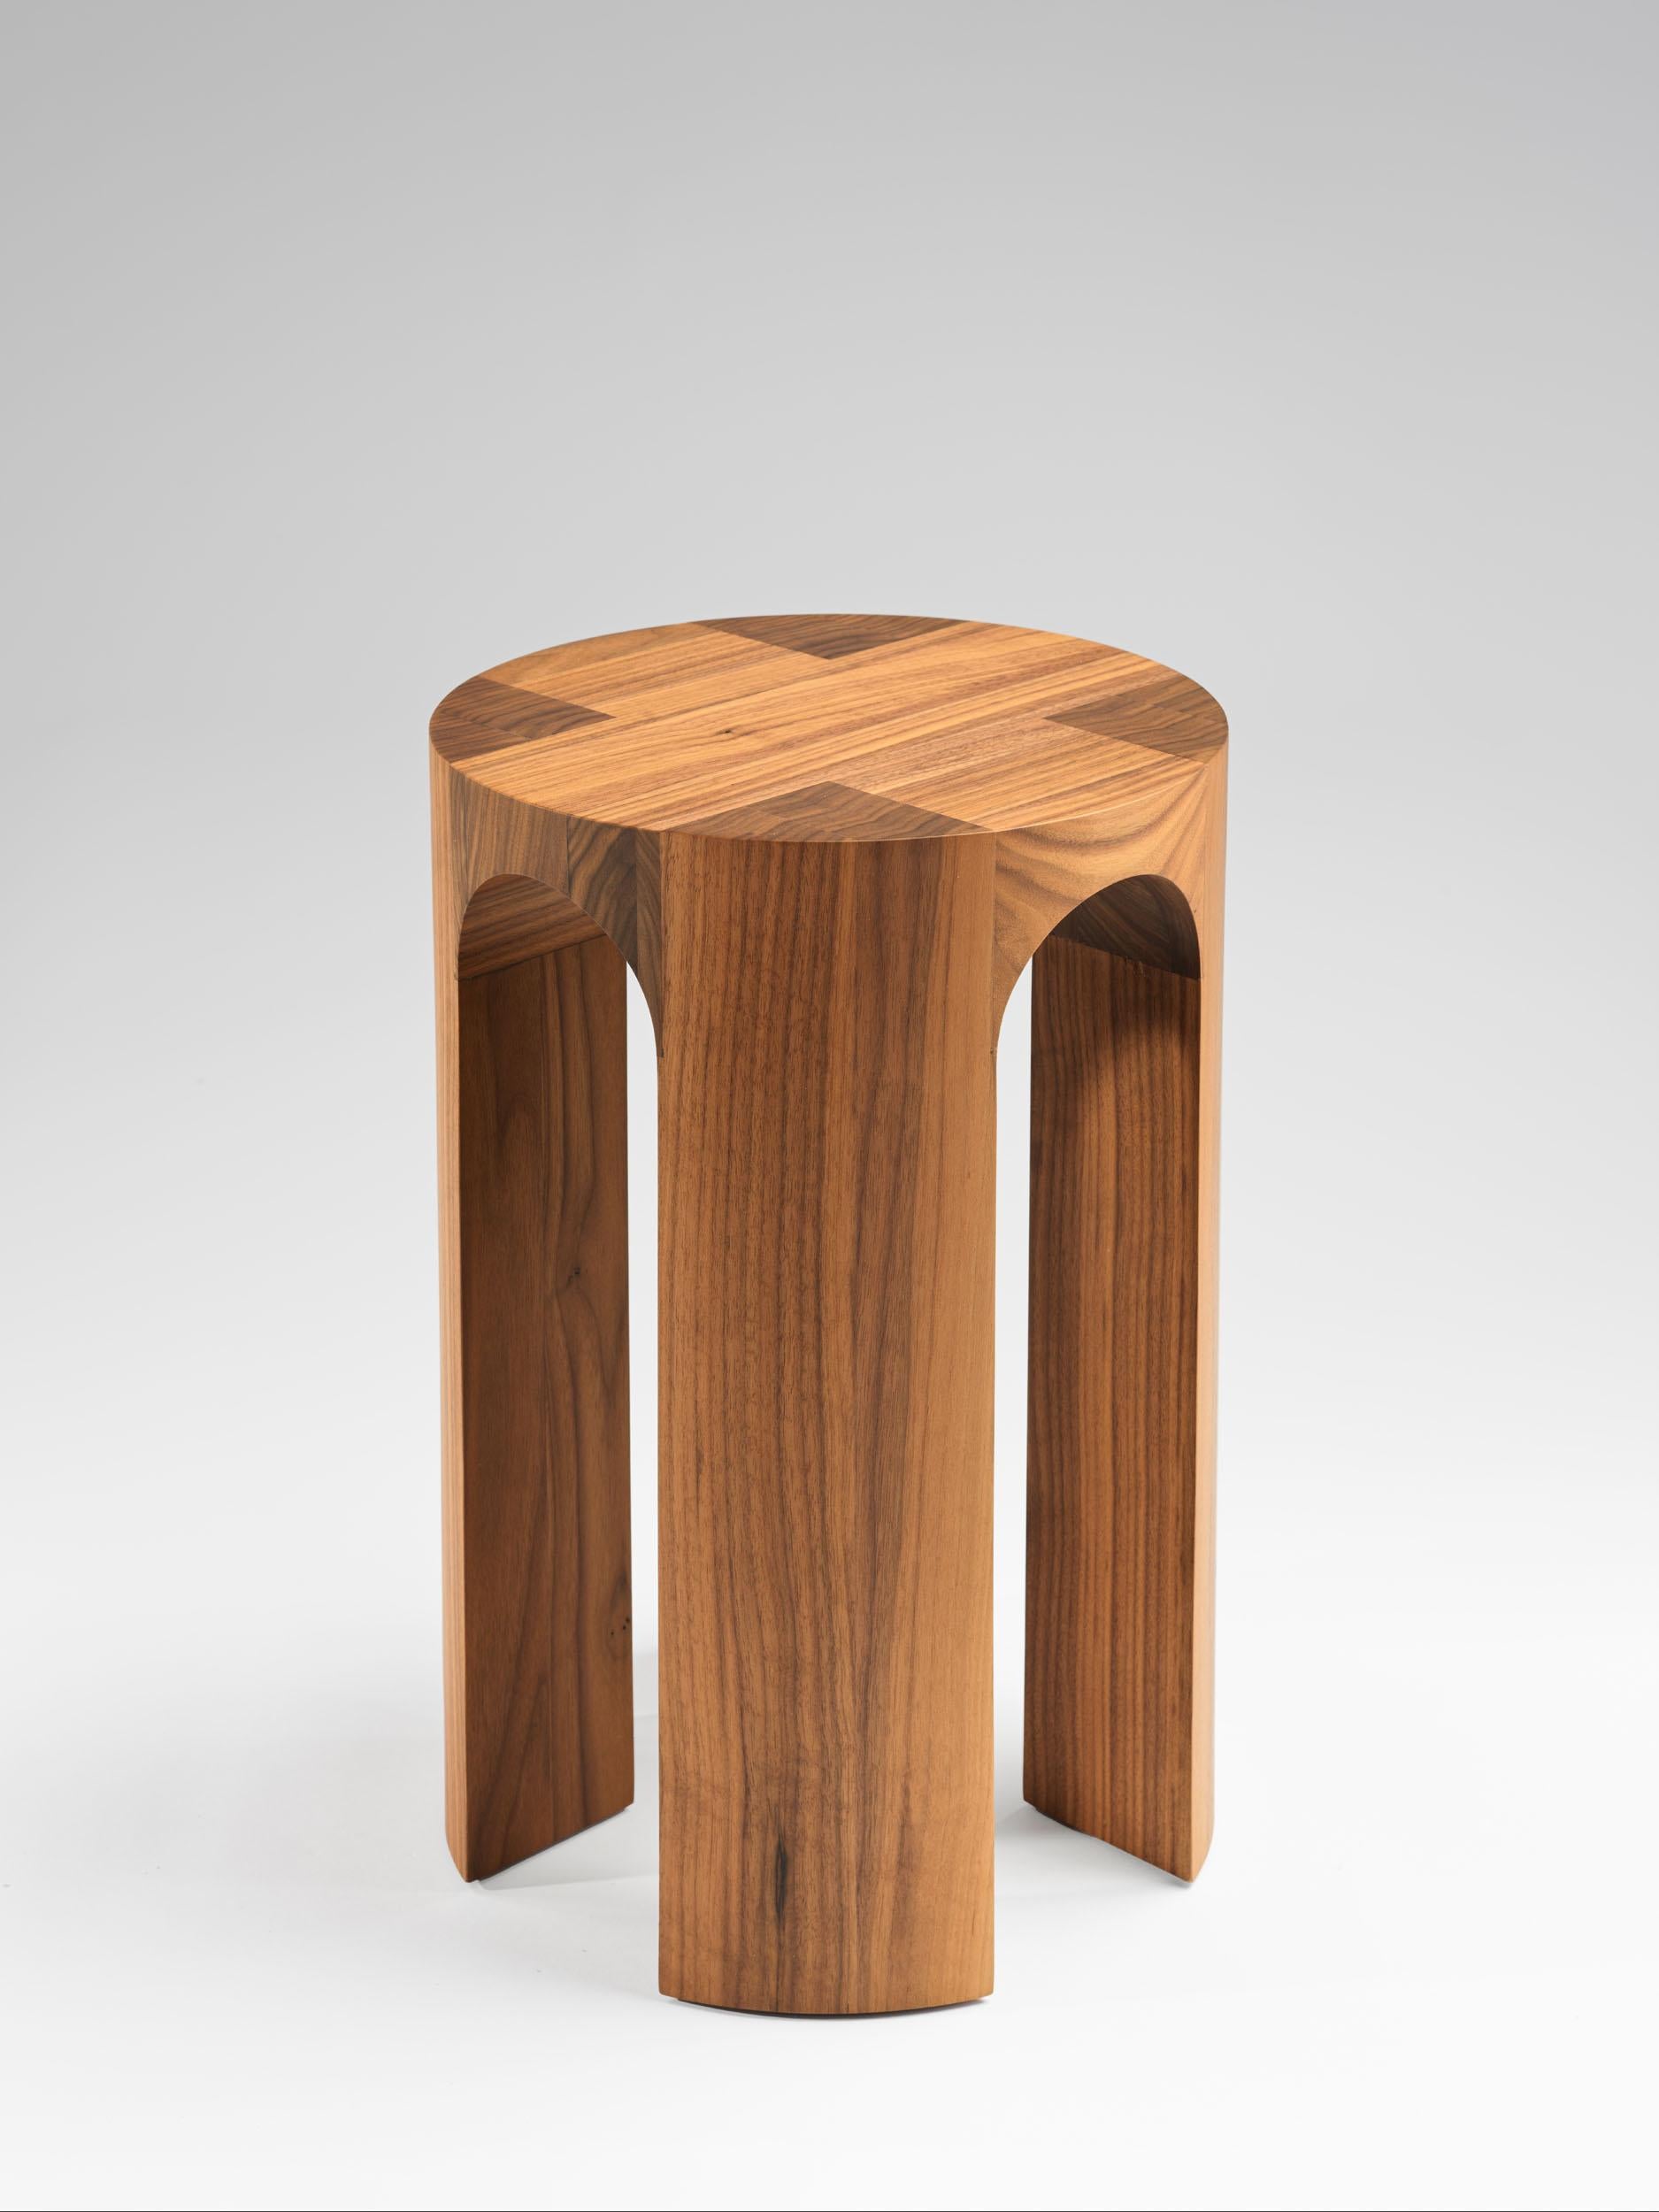 Hand-Crafted Contemporary Solid American Walnut Arcus Stool by Tim Vranken For Sale